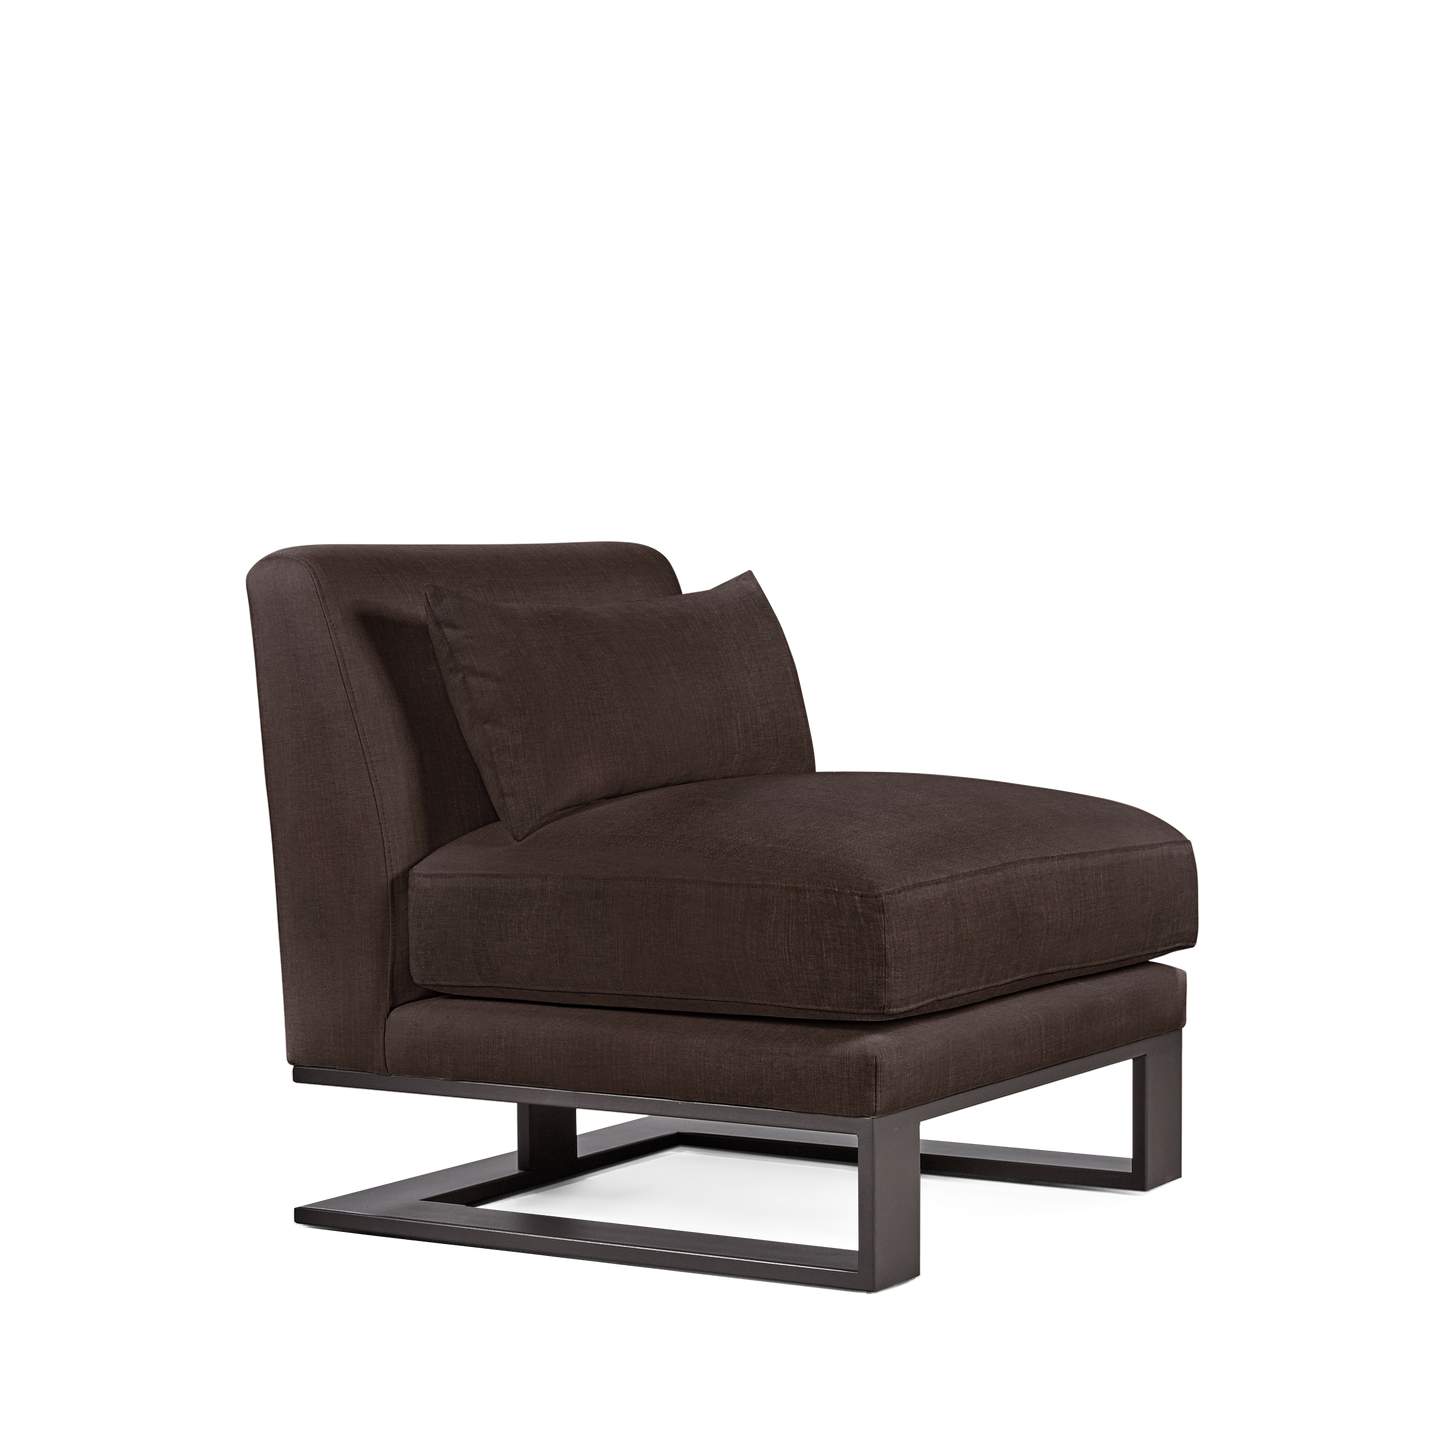 Alpes armchair with brown textile and moka colored wood legs 